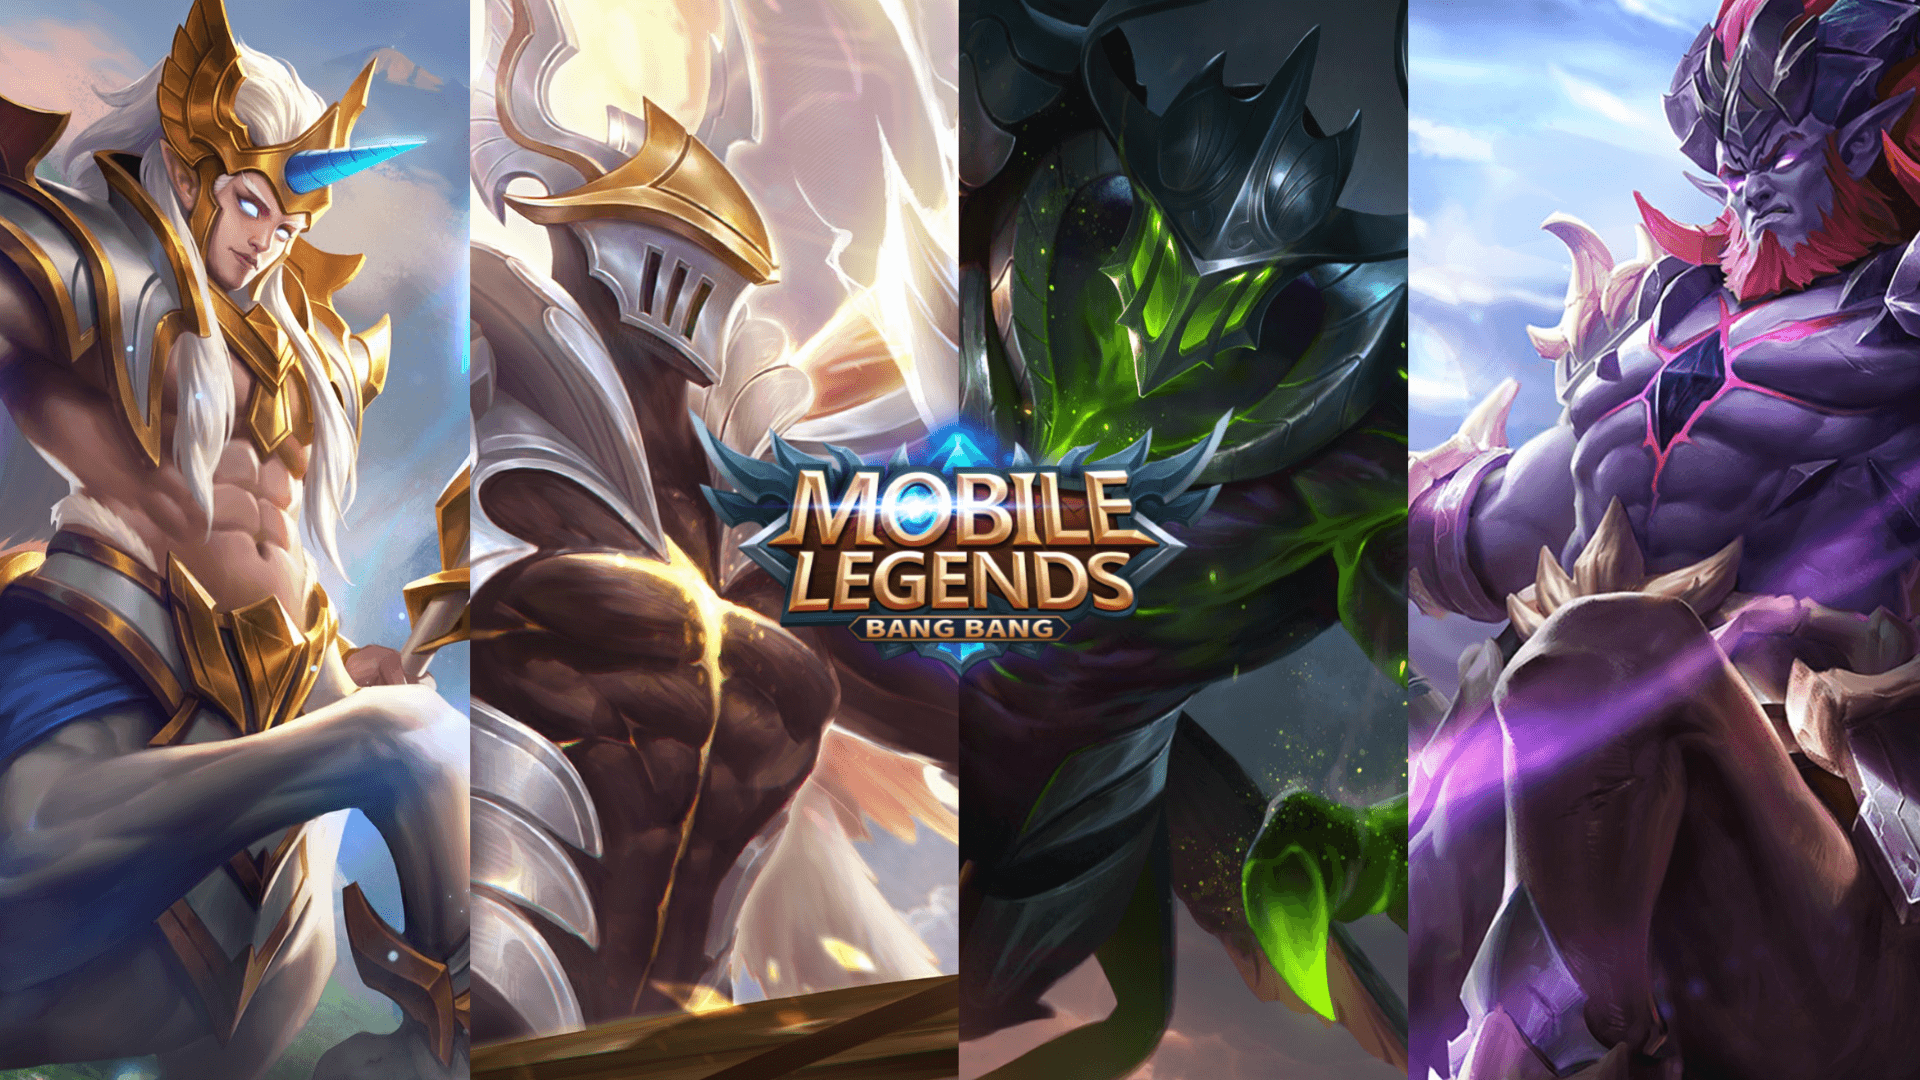 Mobile Legends Hd Wallpapers